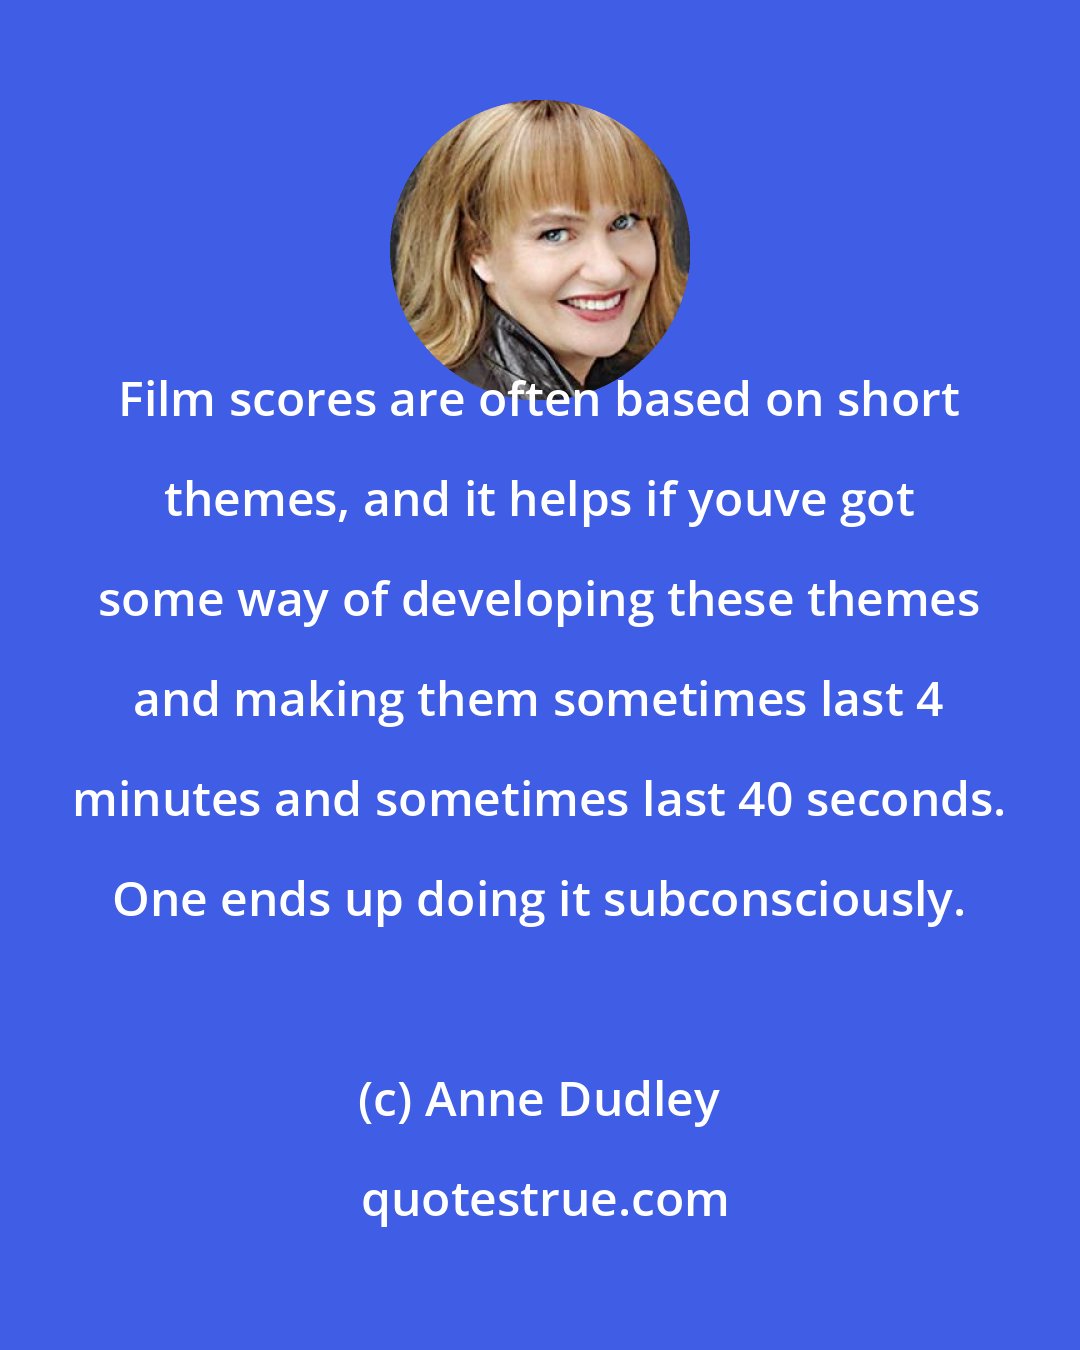 Anne Dudley: Film scores are often based on short themes, and it helps if youve got some way of developing these themes and making them sometimes last 4 minutes and sometimes last 40 seconds. One ends up doing it subconsciously.